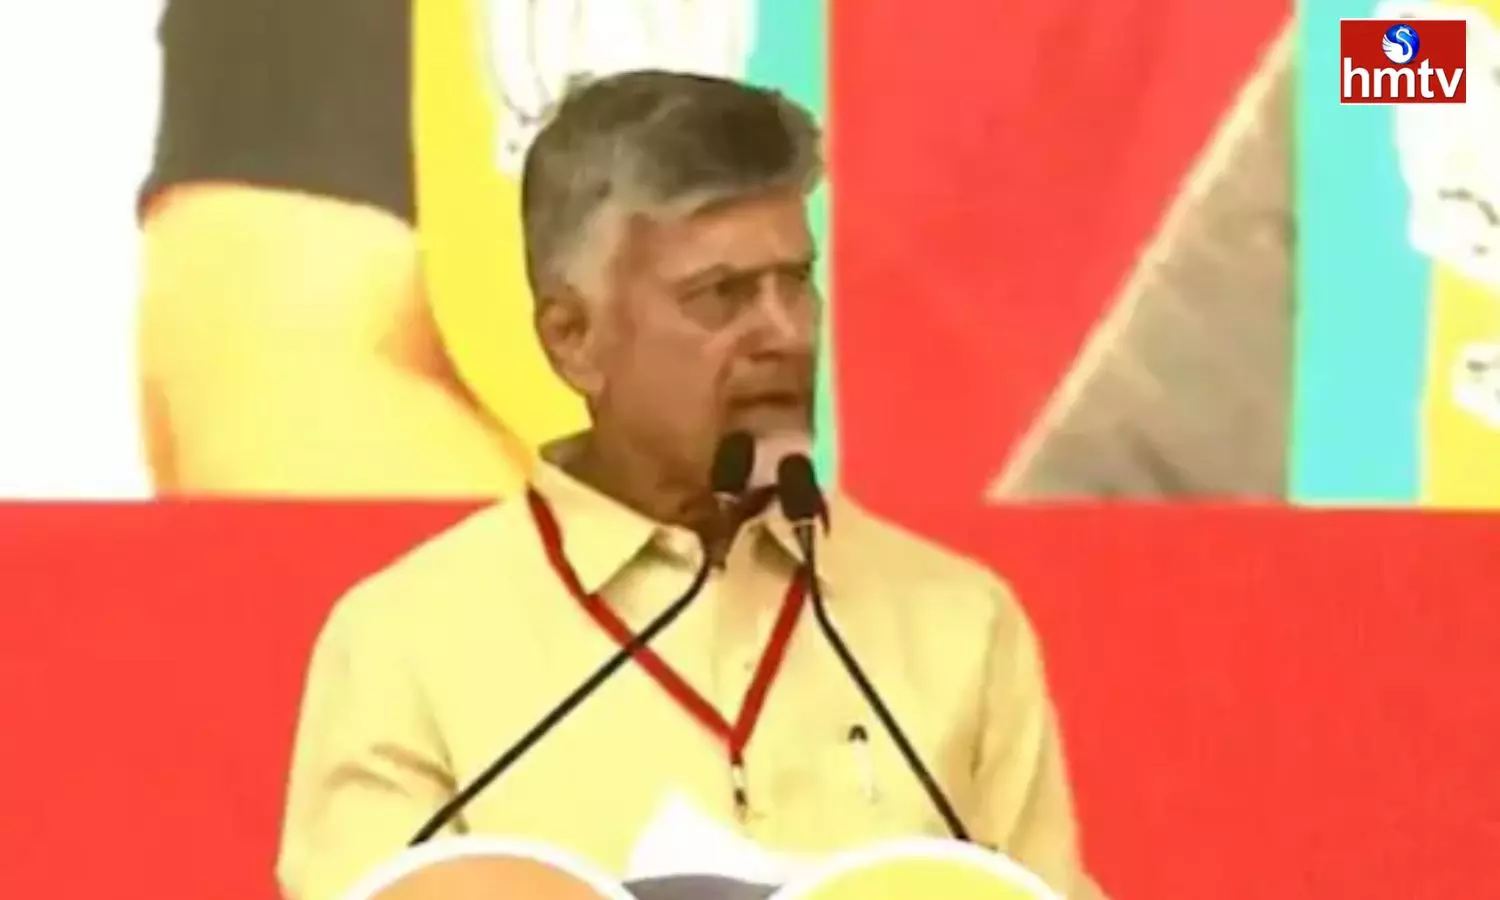 Although The Flags Are Different, The Agenda Of The Three Parties Is The Same Says Chandra Babu